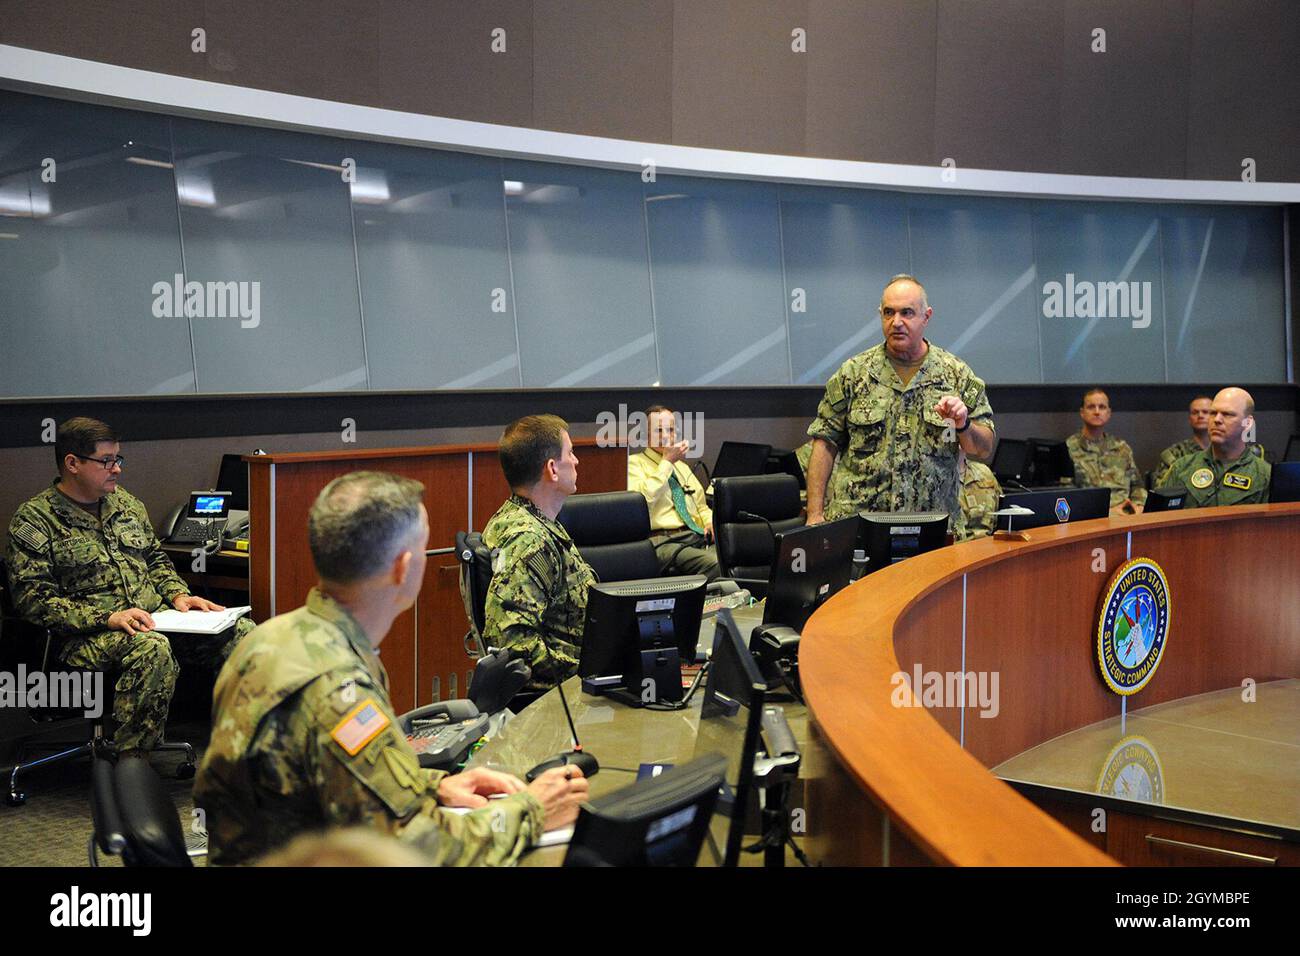 U.S. Navy Adm. Charles “Chas” Richard, commander of U.S. Strategic Command (USSTRATCOM), speaks to his key staff on the battle deck of USSTRATCOM’s command and control facility (C2F) during Exercise Global Lightning 20 at Offutt Air Force Base, Neb., Jan. 30, 2020. Global Lightning 20 tested executing global operations in coordination with the Joint Staff, 5 other combatant commands, services, U.S. government agencies, and allies to deter, detect and, if necessary, defeat strategic attacks against the United States and its allies. This is the first major exercise USSTRATCOM conducted entirely Stock Photo